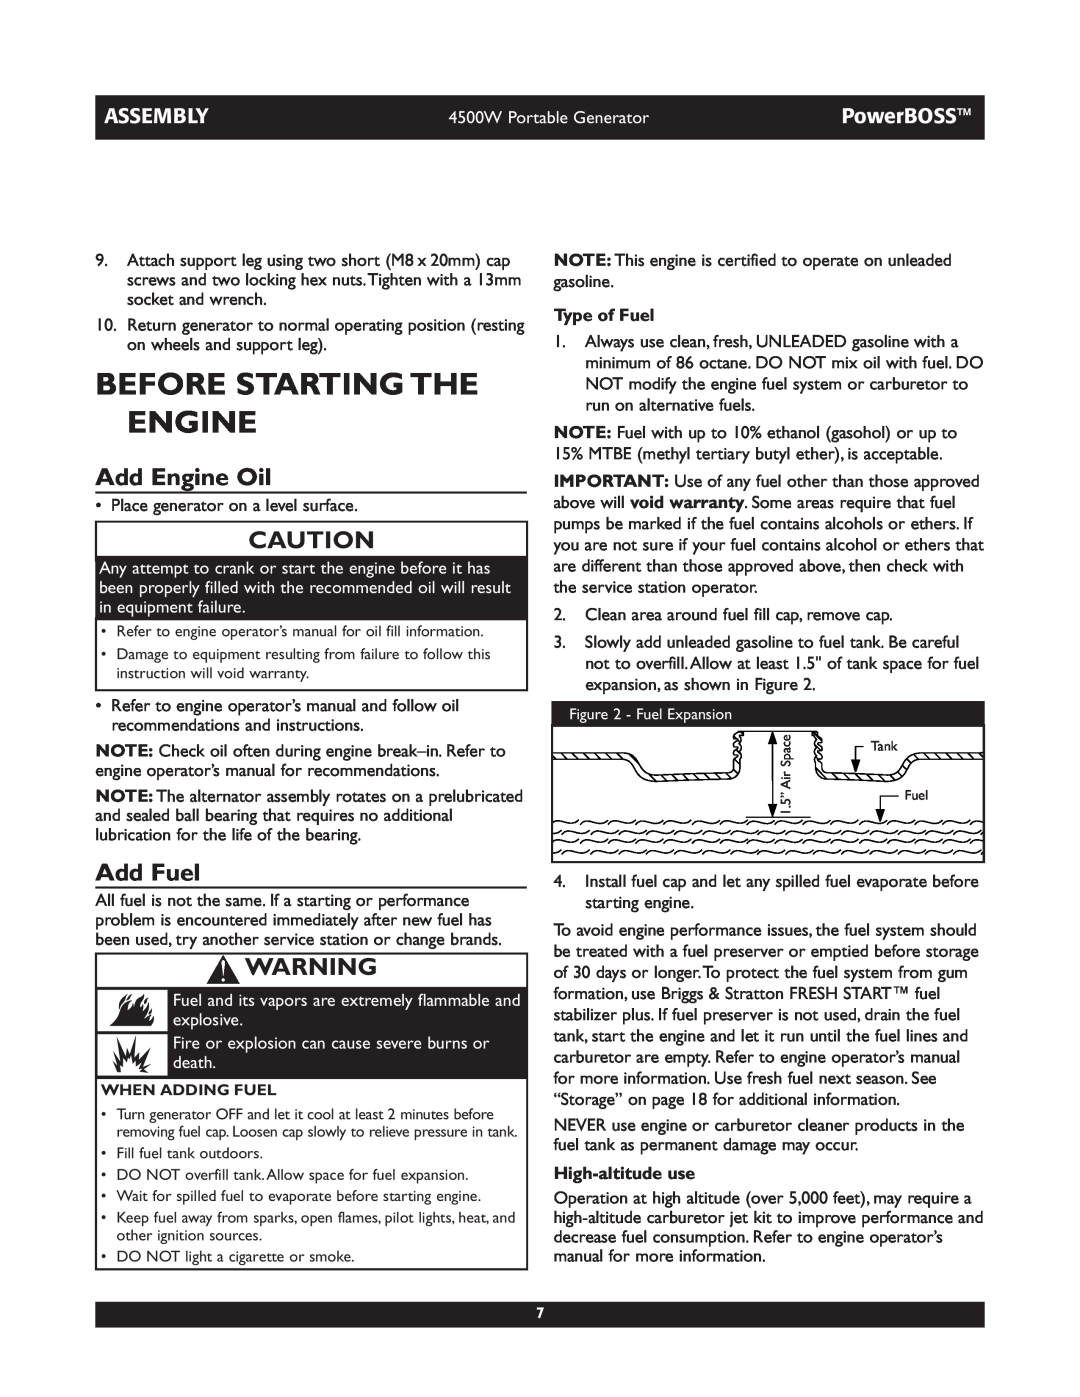 Briggs & Stratton 01648-1 operating instructions Before Starting The Engine, Add Engine Oil, Add Fuel, Assembly, PowerBOSS 